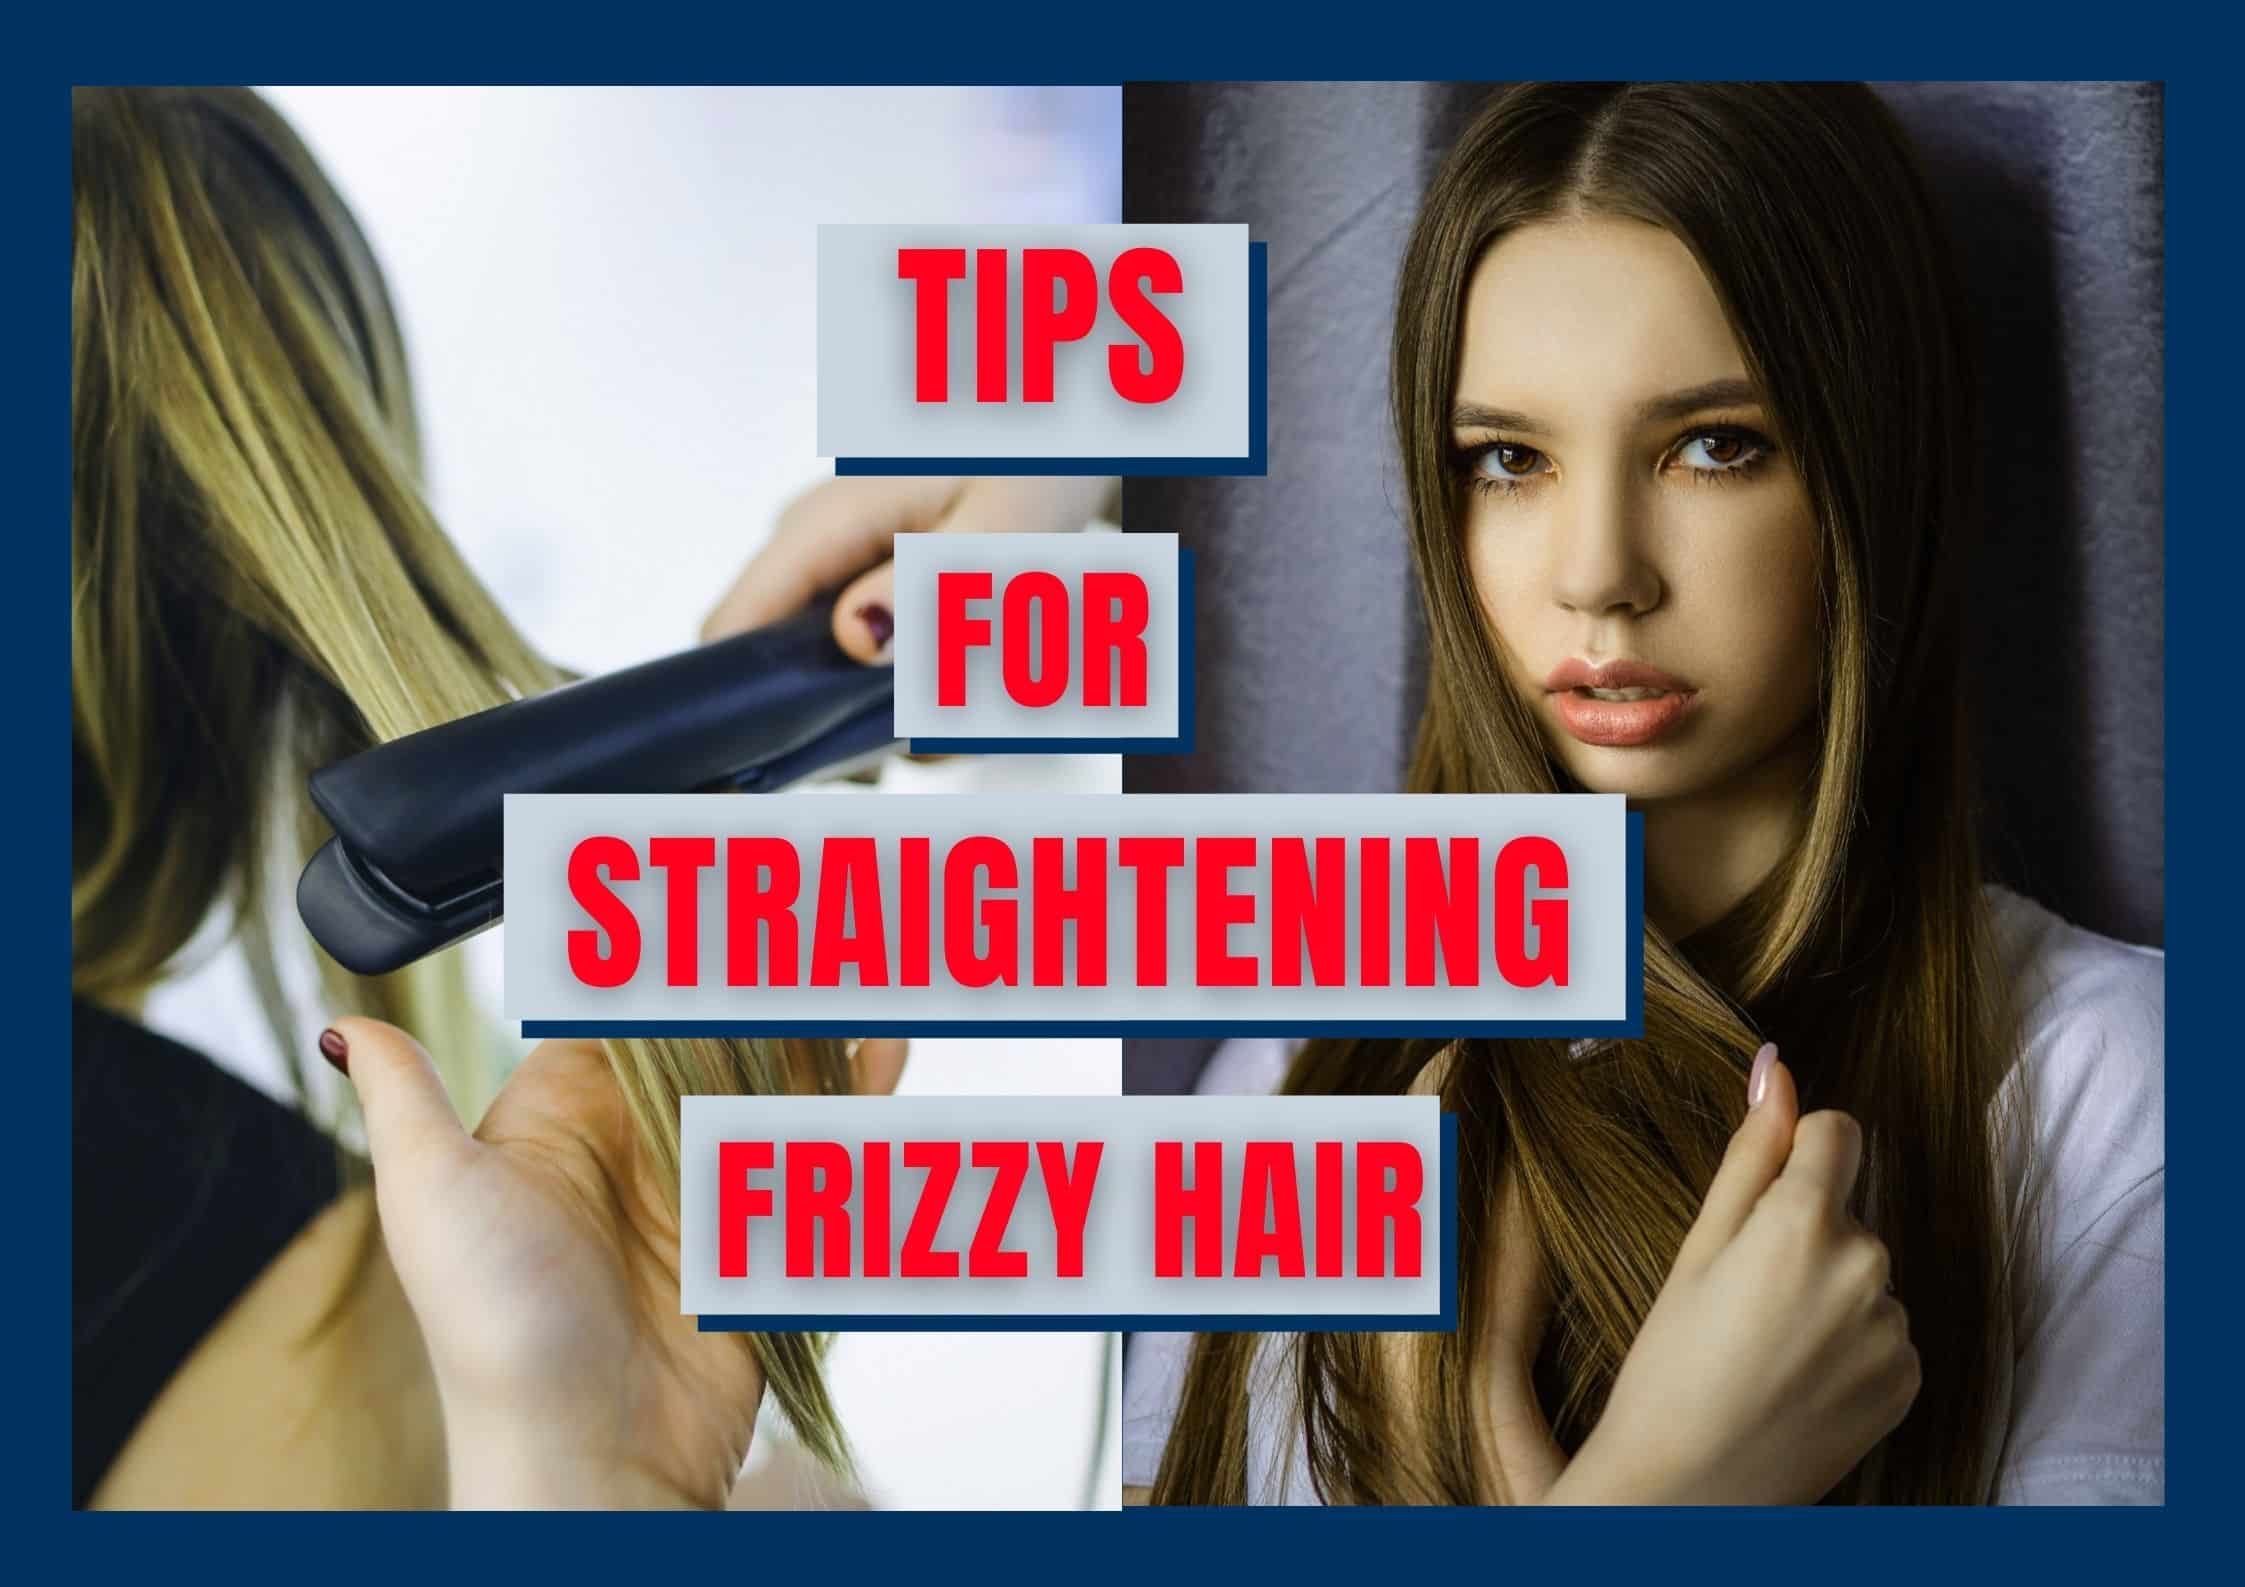 How To Straighten Frizzy Hair In 6 Easy Steps - Hair Everyday Review